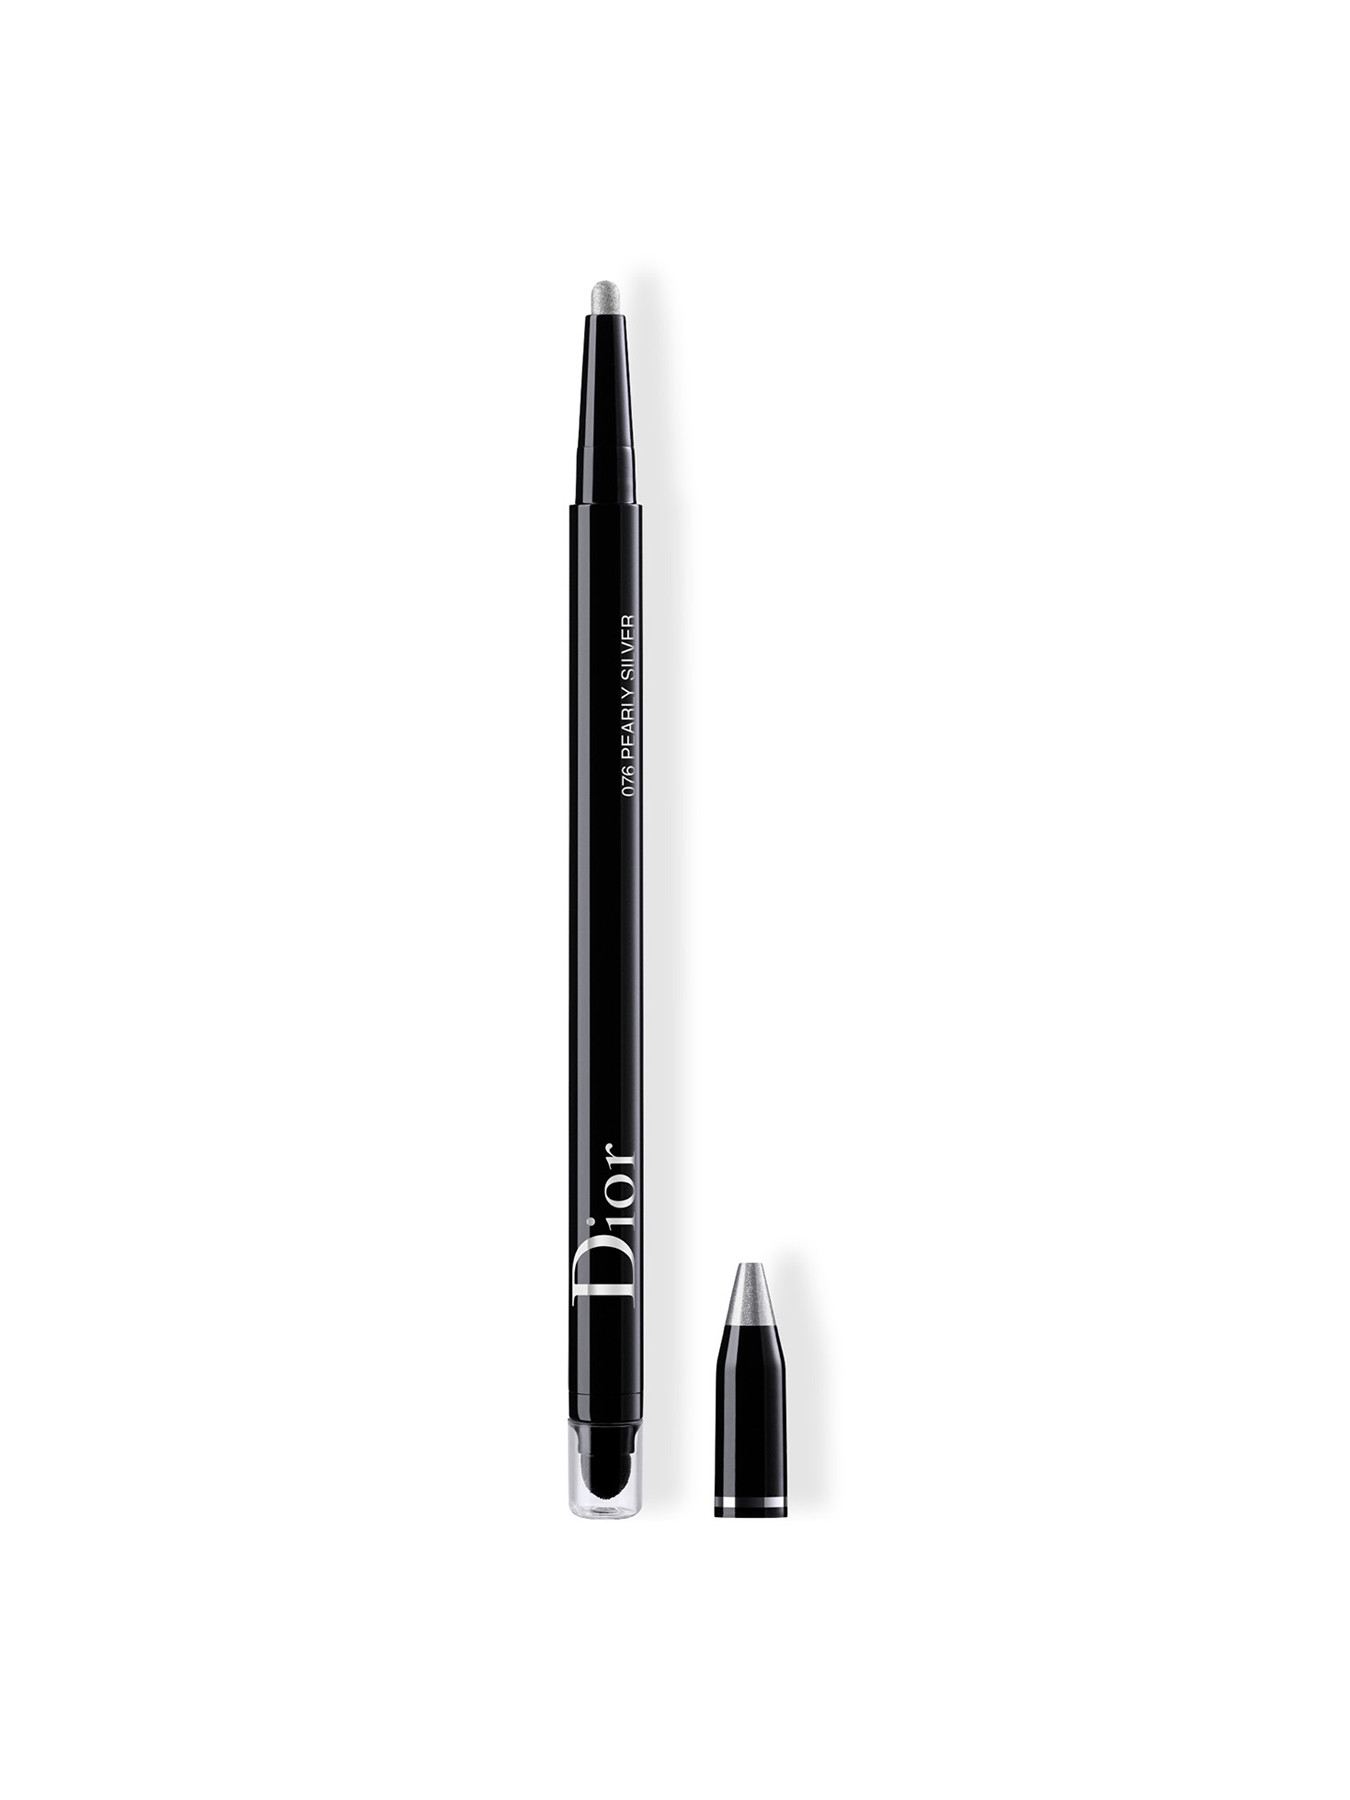 Dior Show 24h Stylo Waterproof Eyeliner 076 Pearly Silver